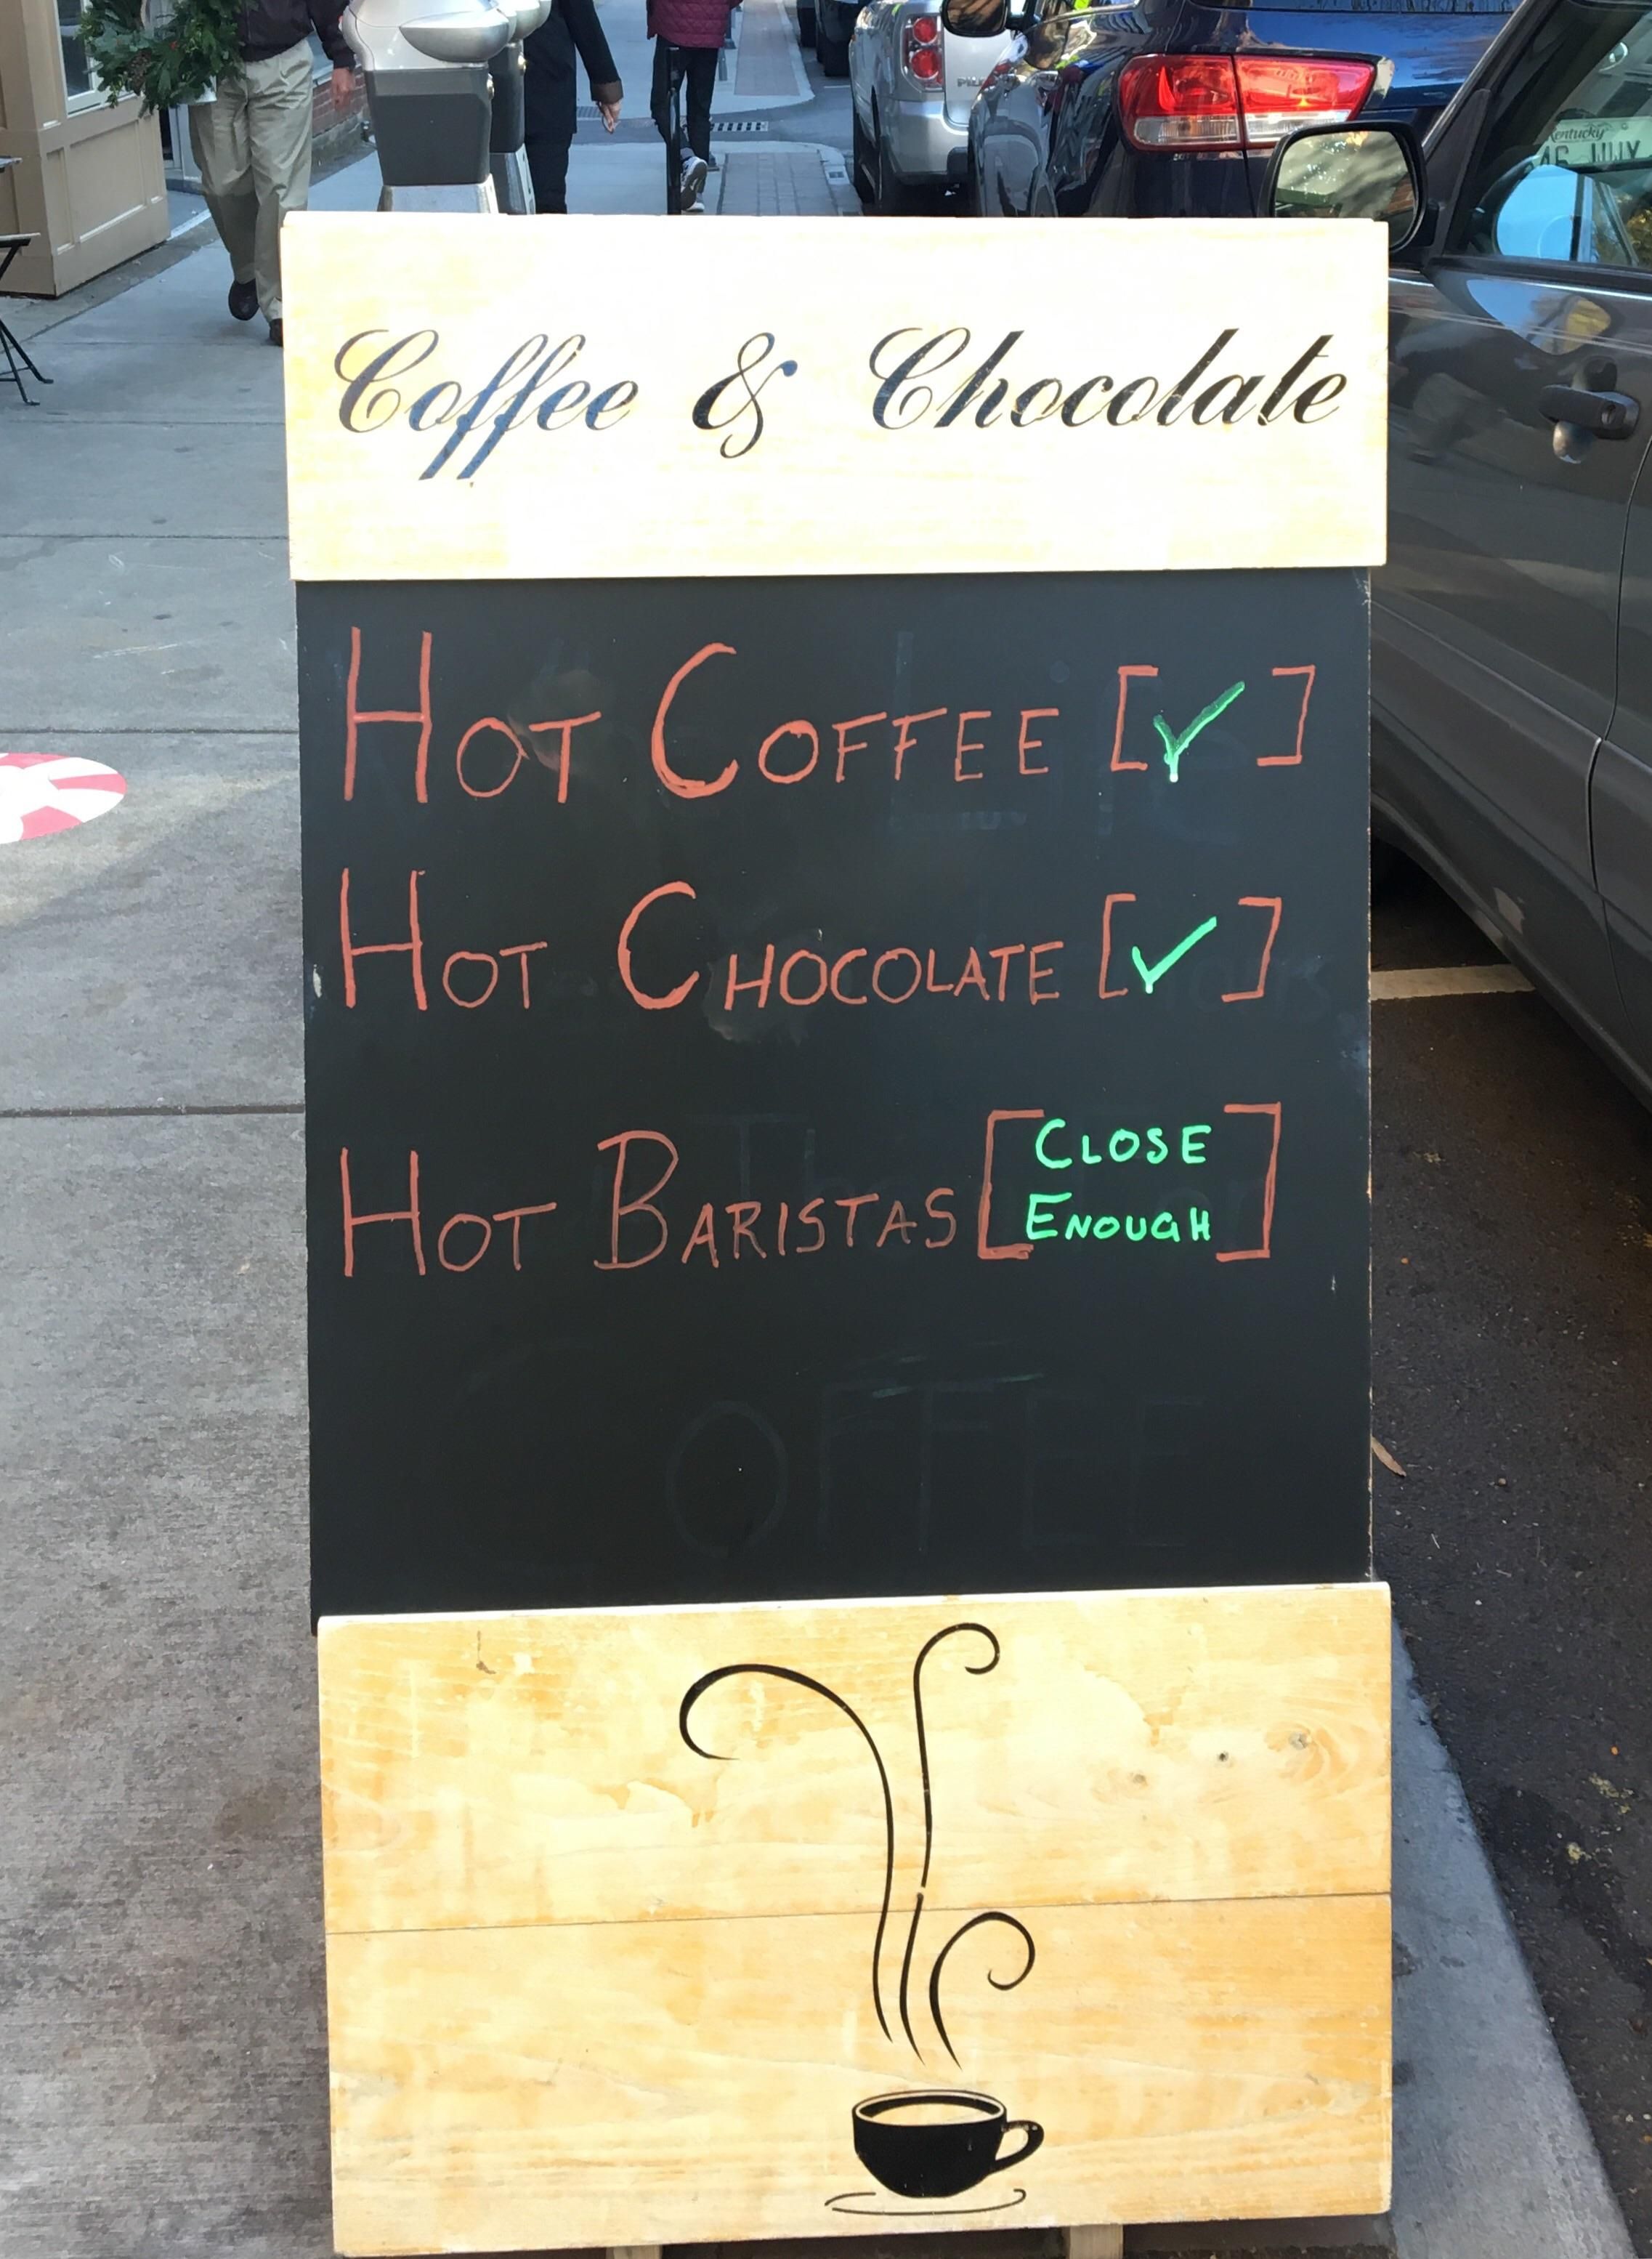 This sign at my local coffee shop.